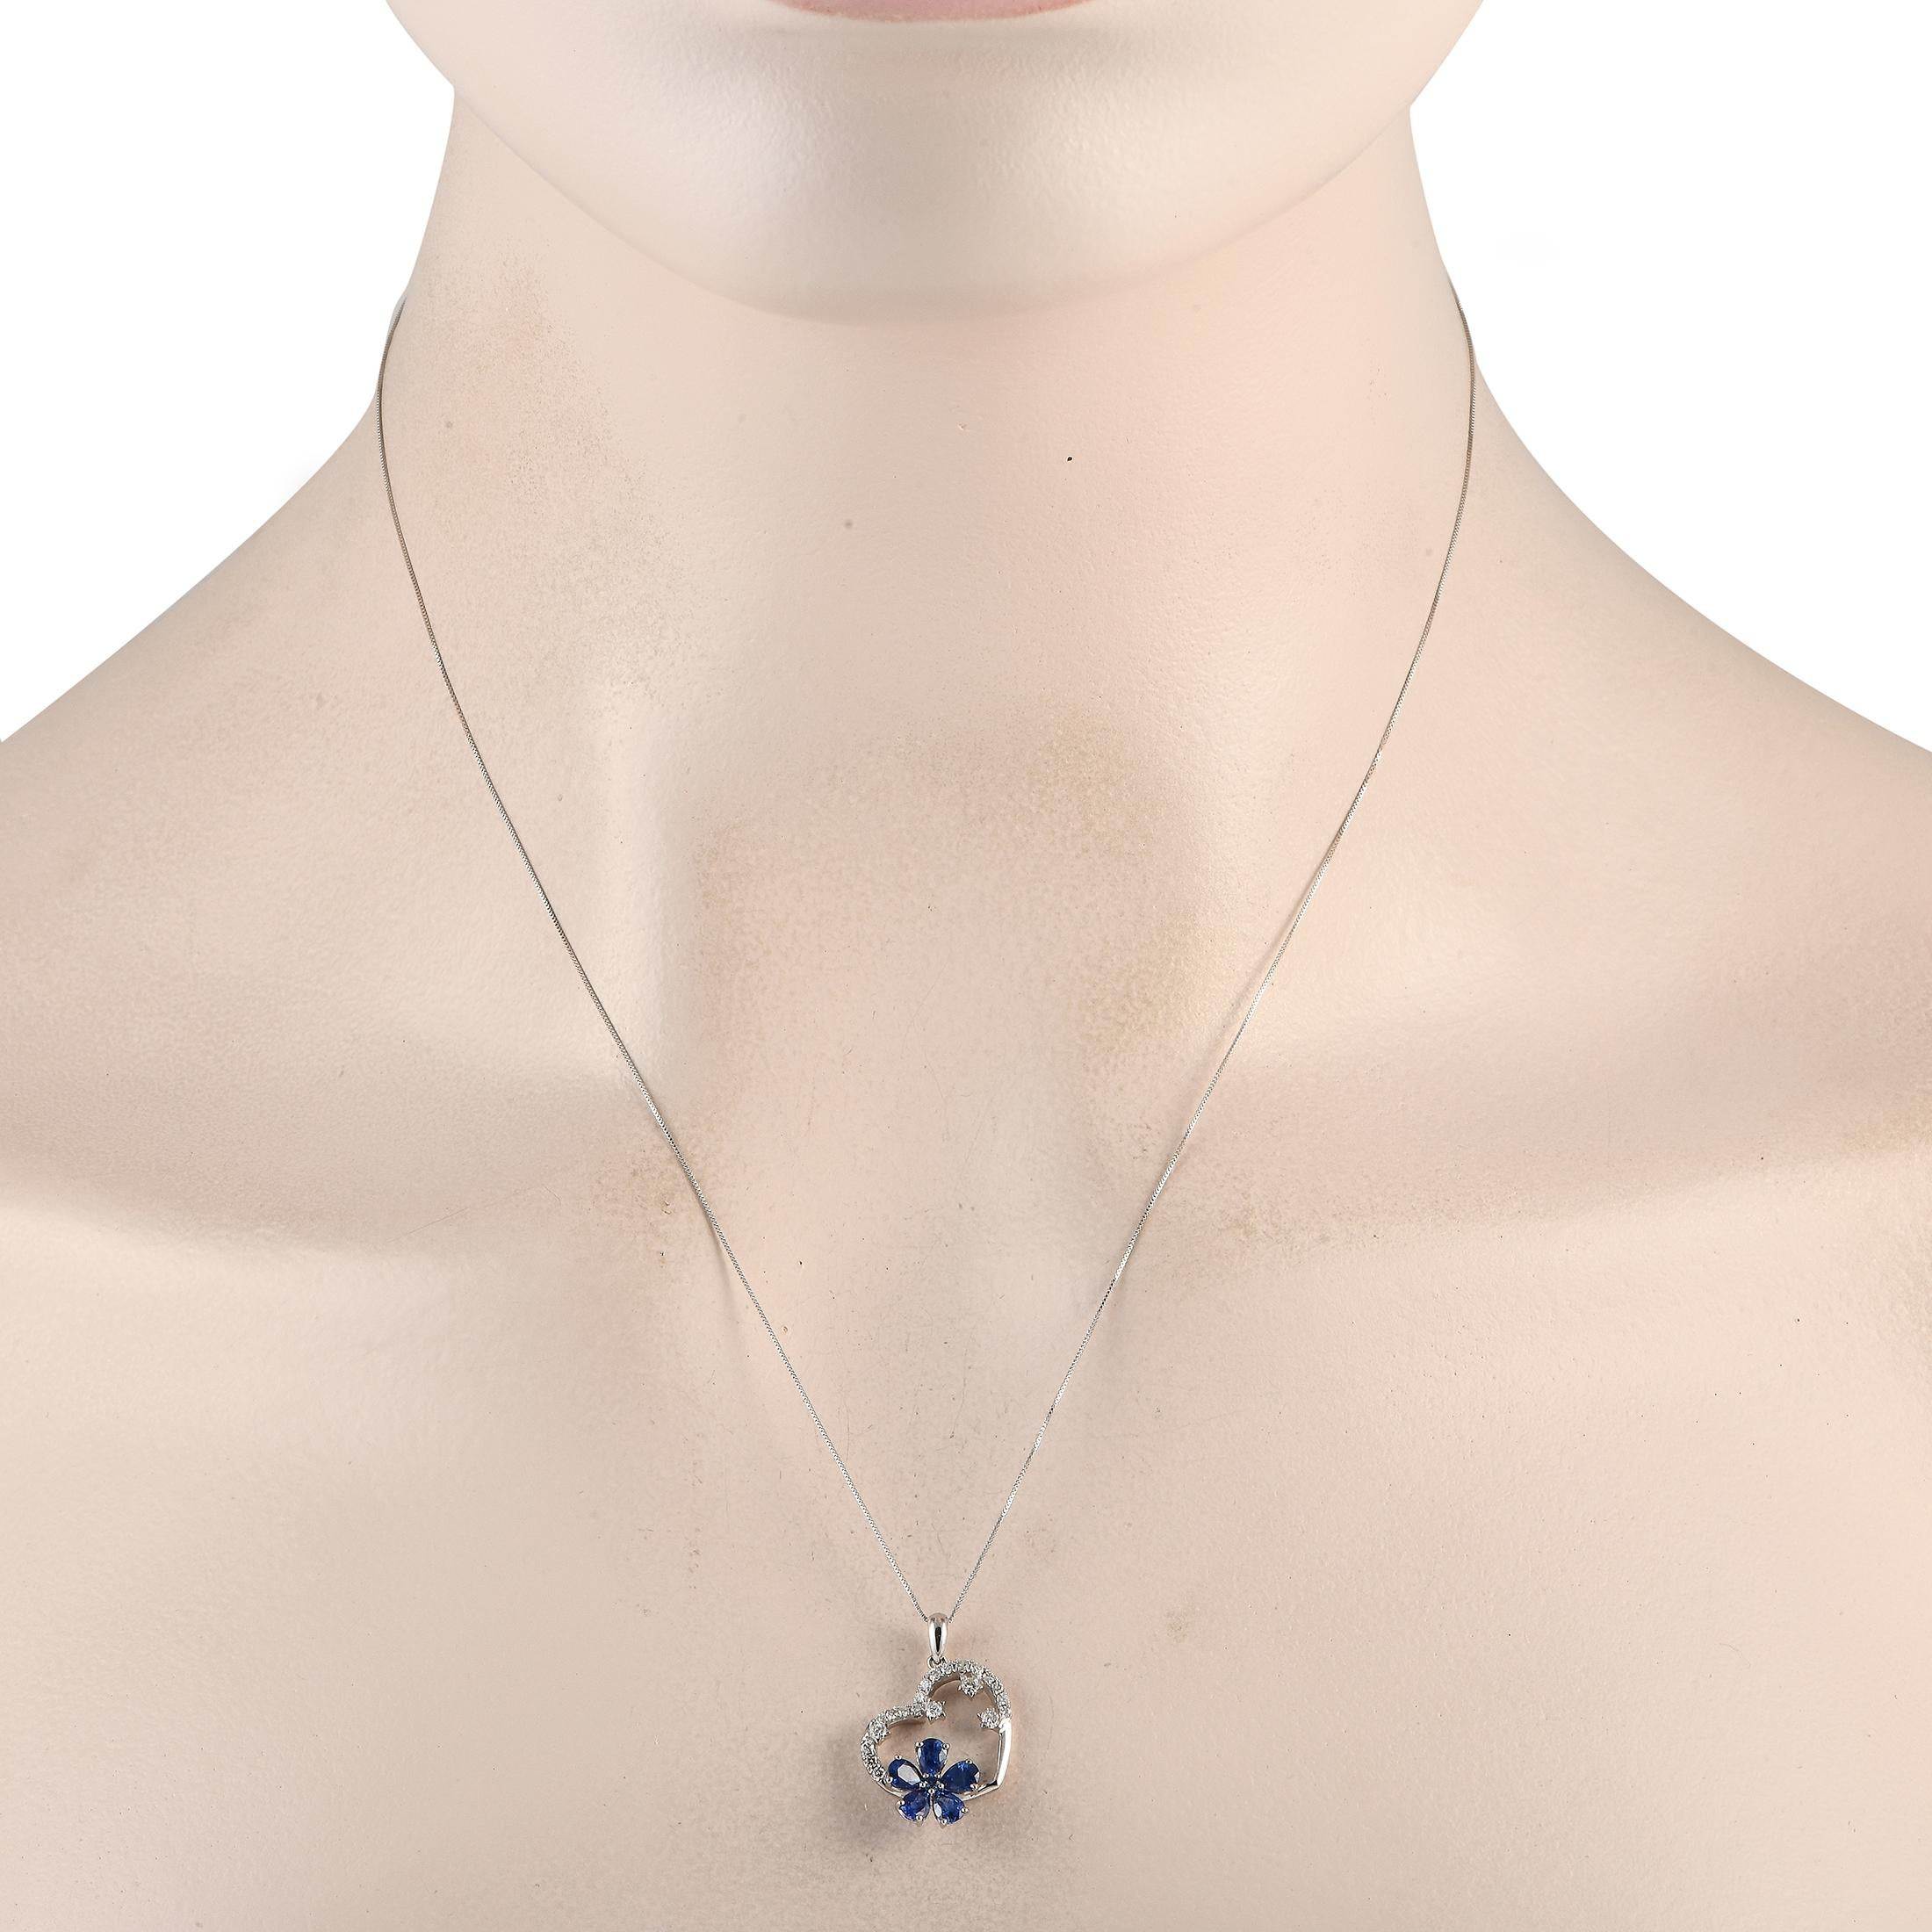 This 14K White Gold necklace is as charming as it is luxurious. Suspended from an 18 chain, youll find a heart shaped pendant measuring 0.85 long by 0.65 wide. Sapphire gemstones come together to create a fabulous floral accent, while Diamonds